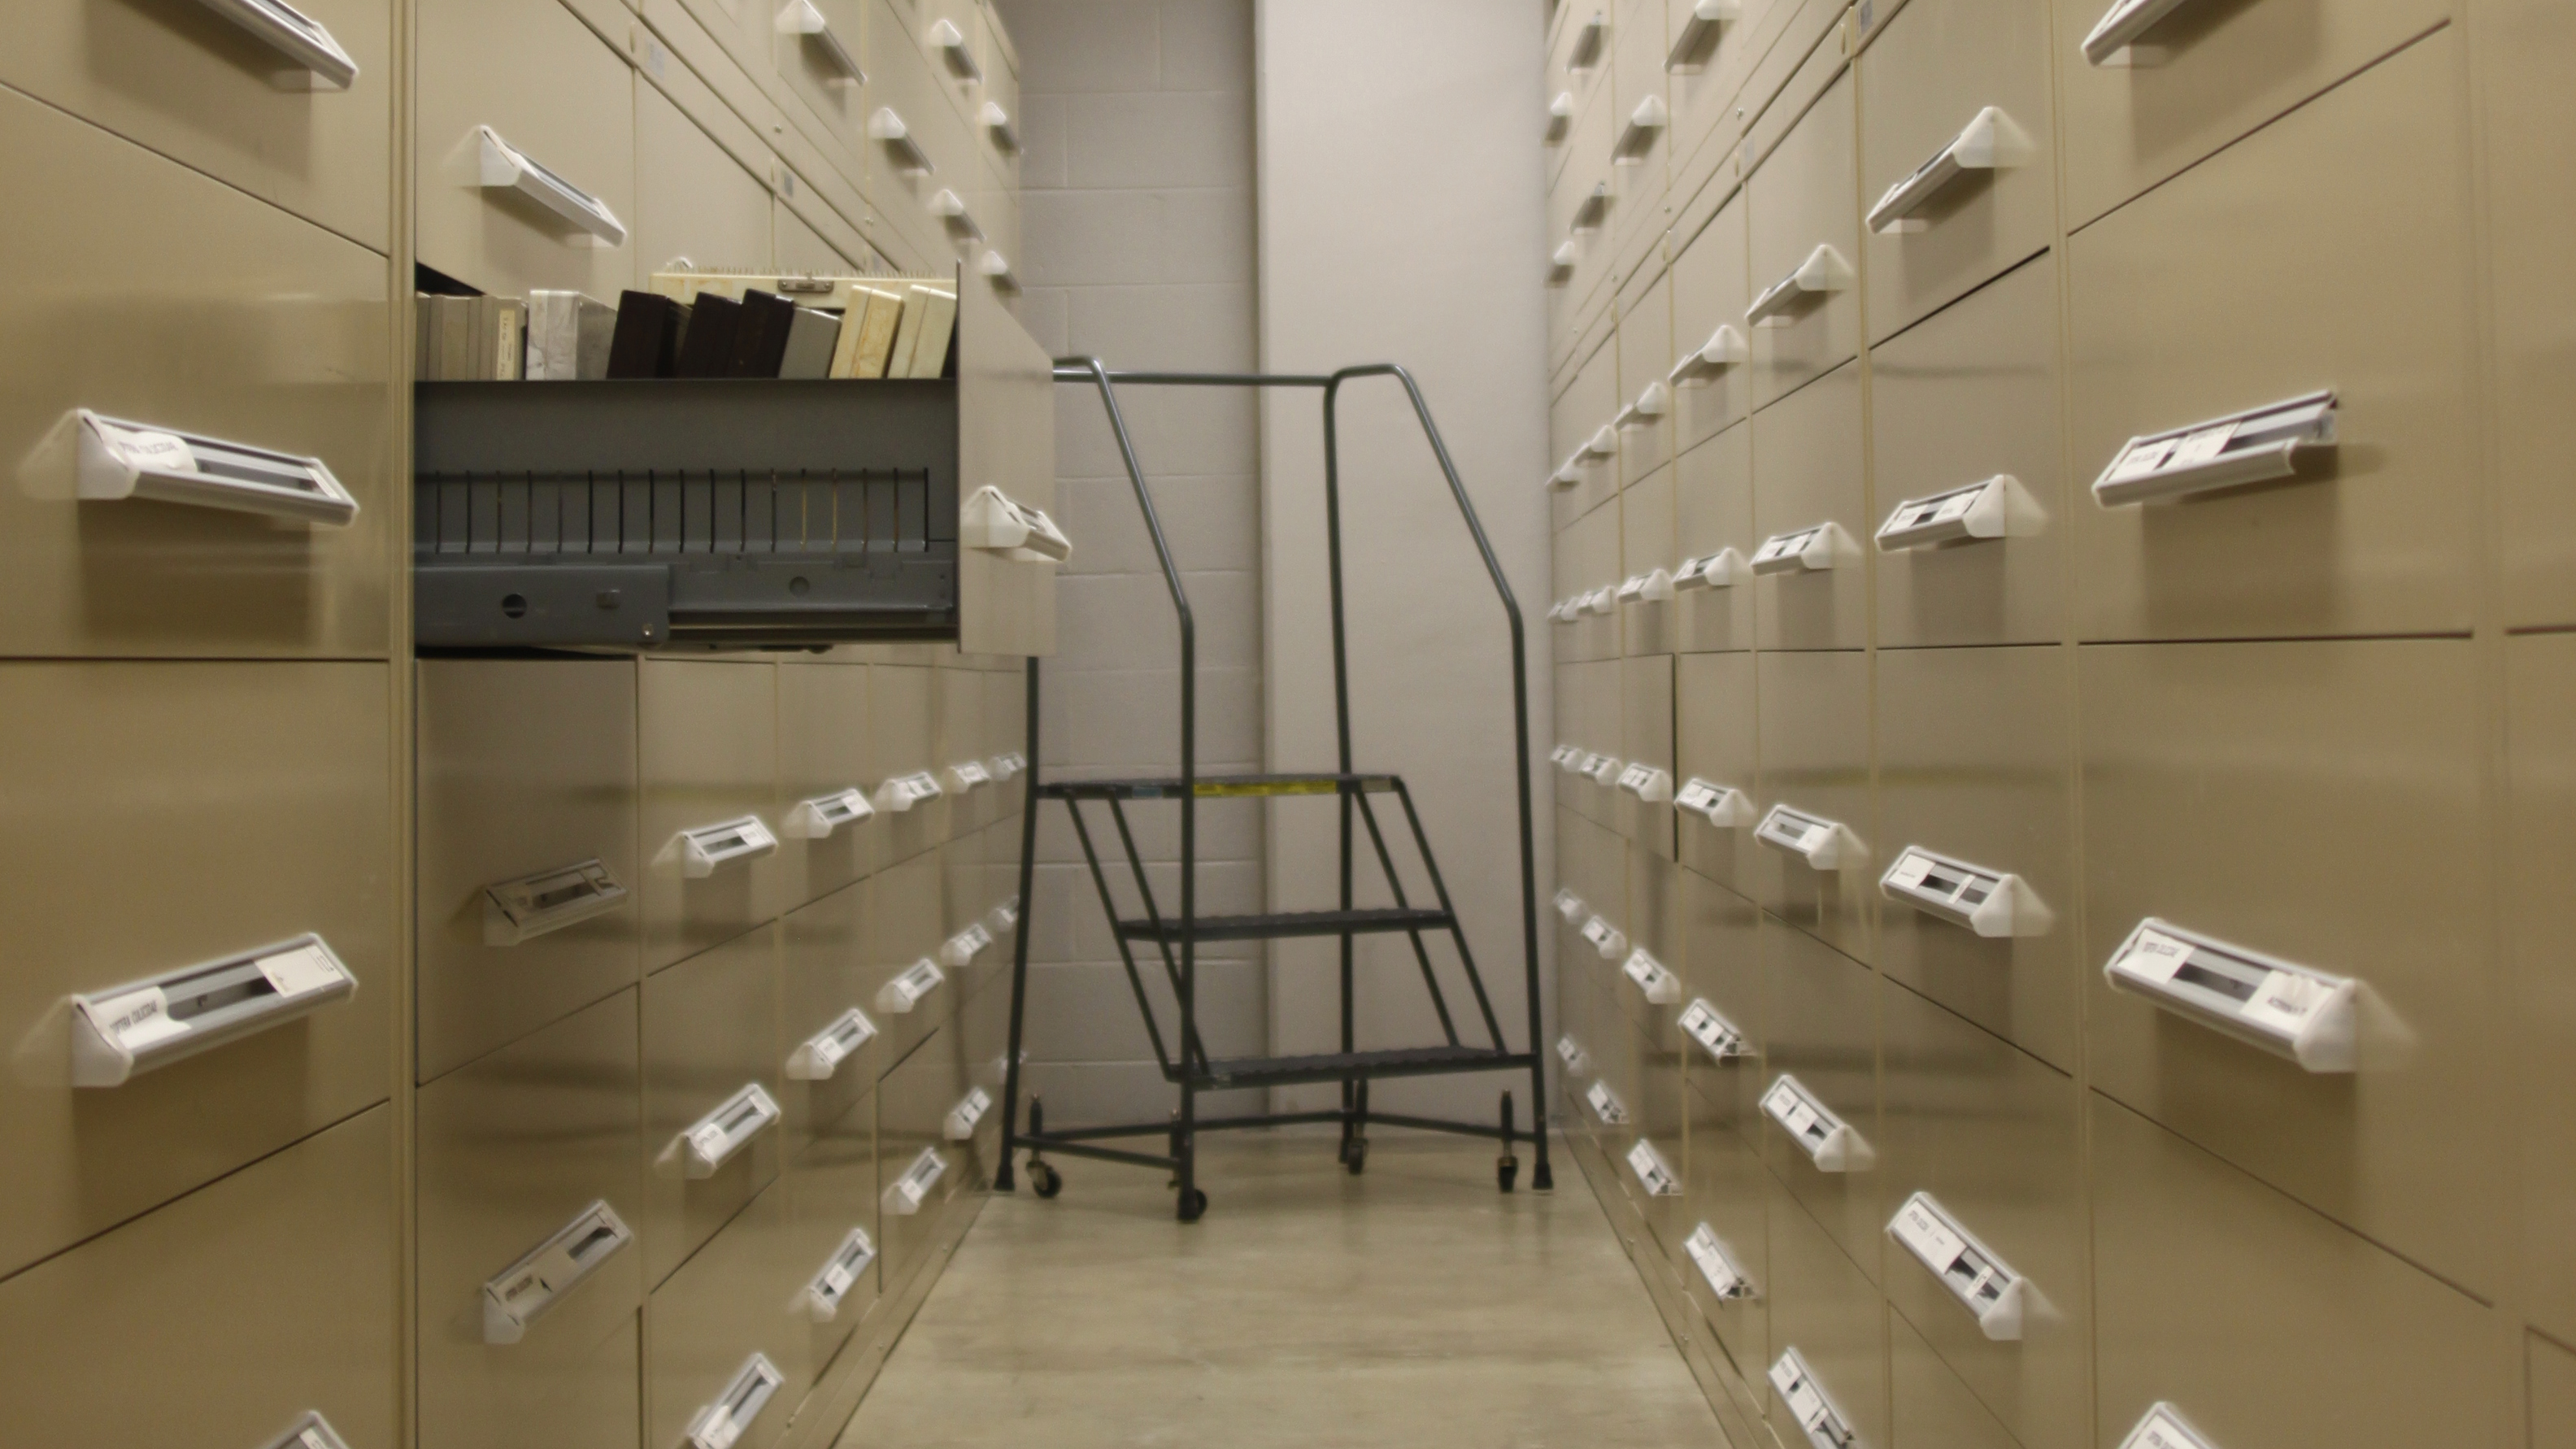 View of collections drawers